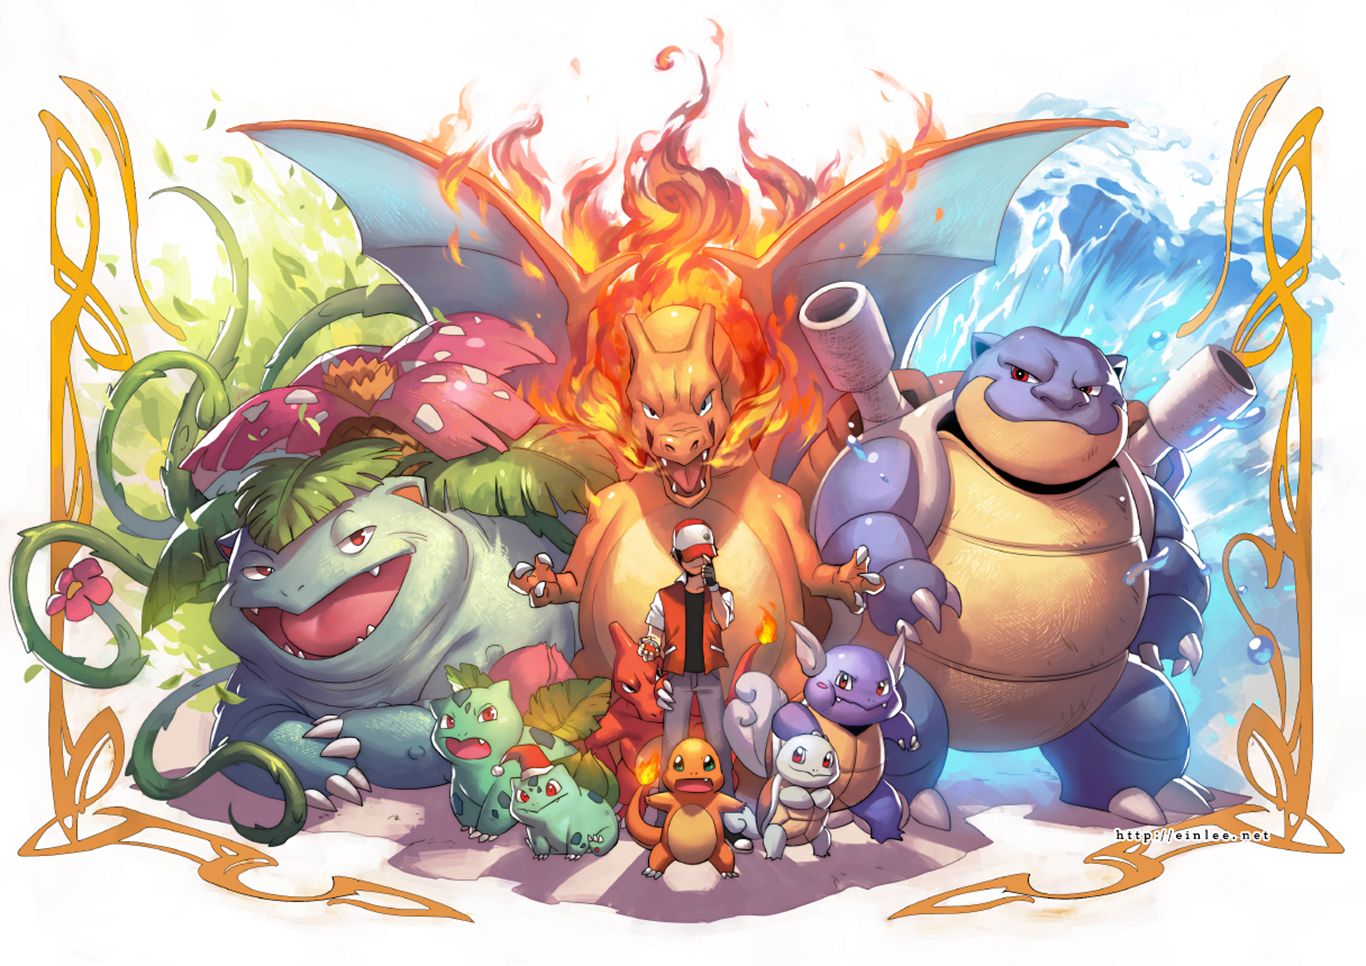 Cool Pokemon Wallpapers Wallpapers, Backgrounds, Images, Art Photos